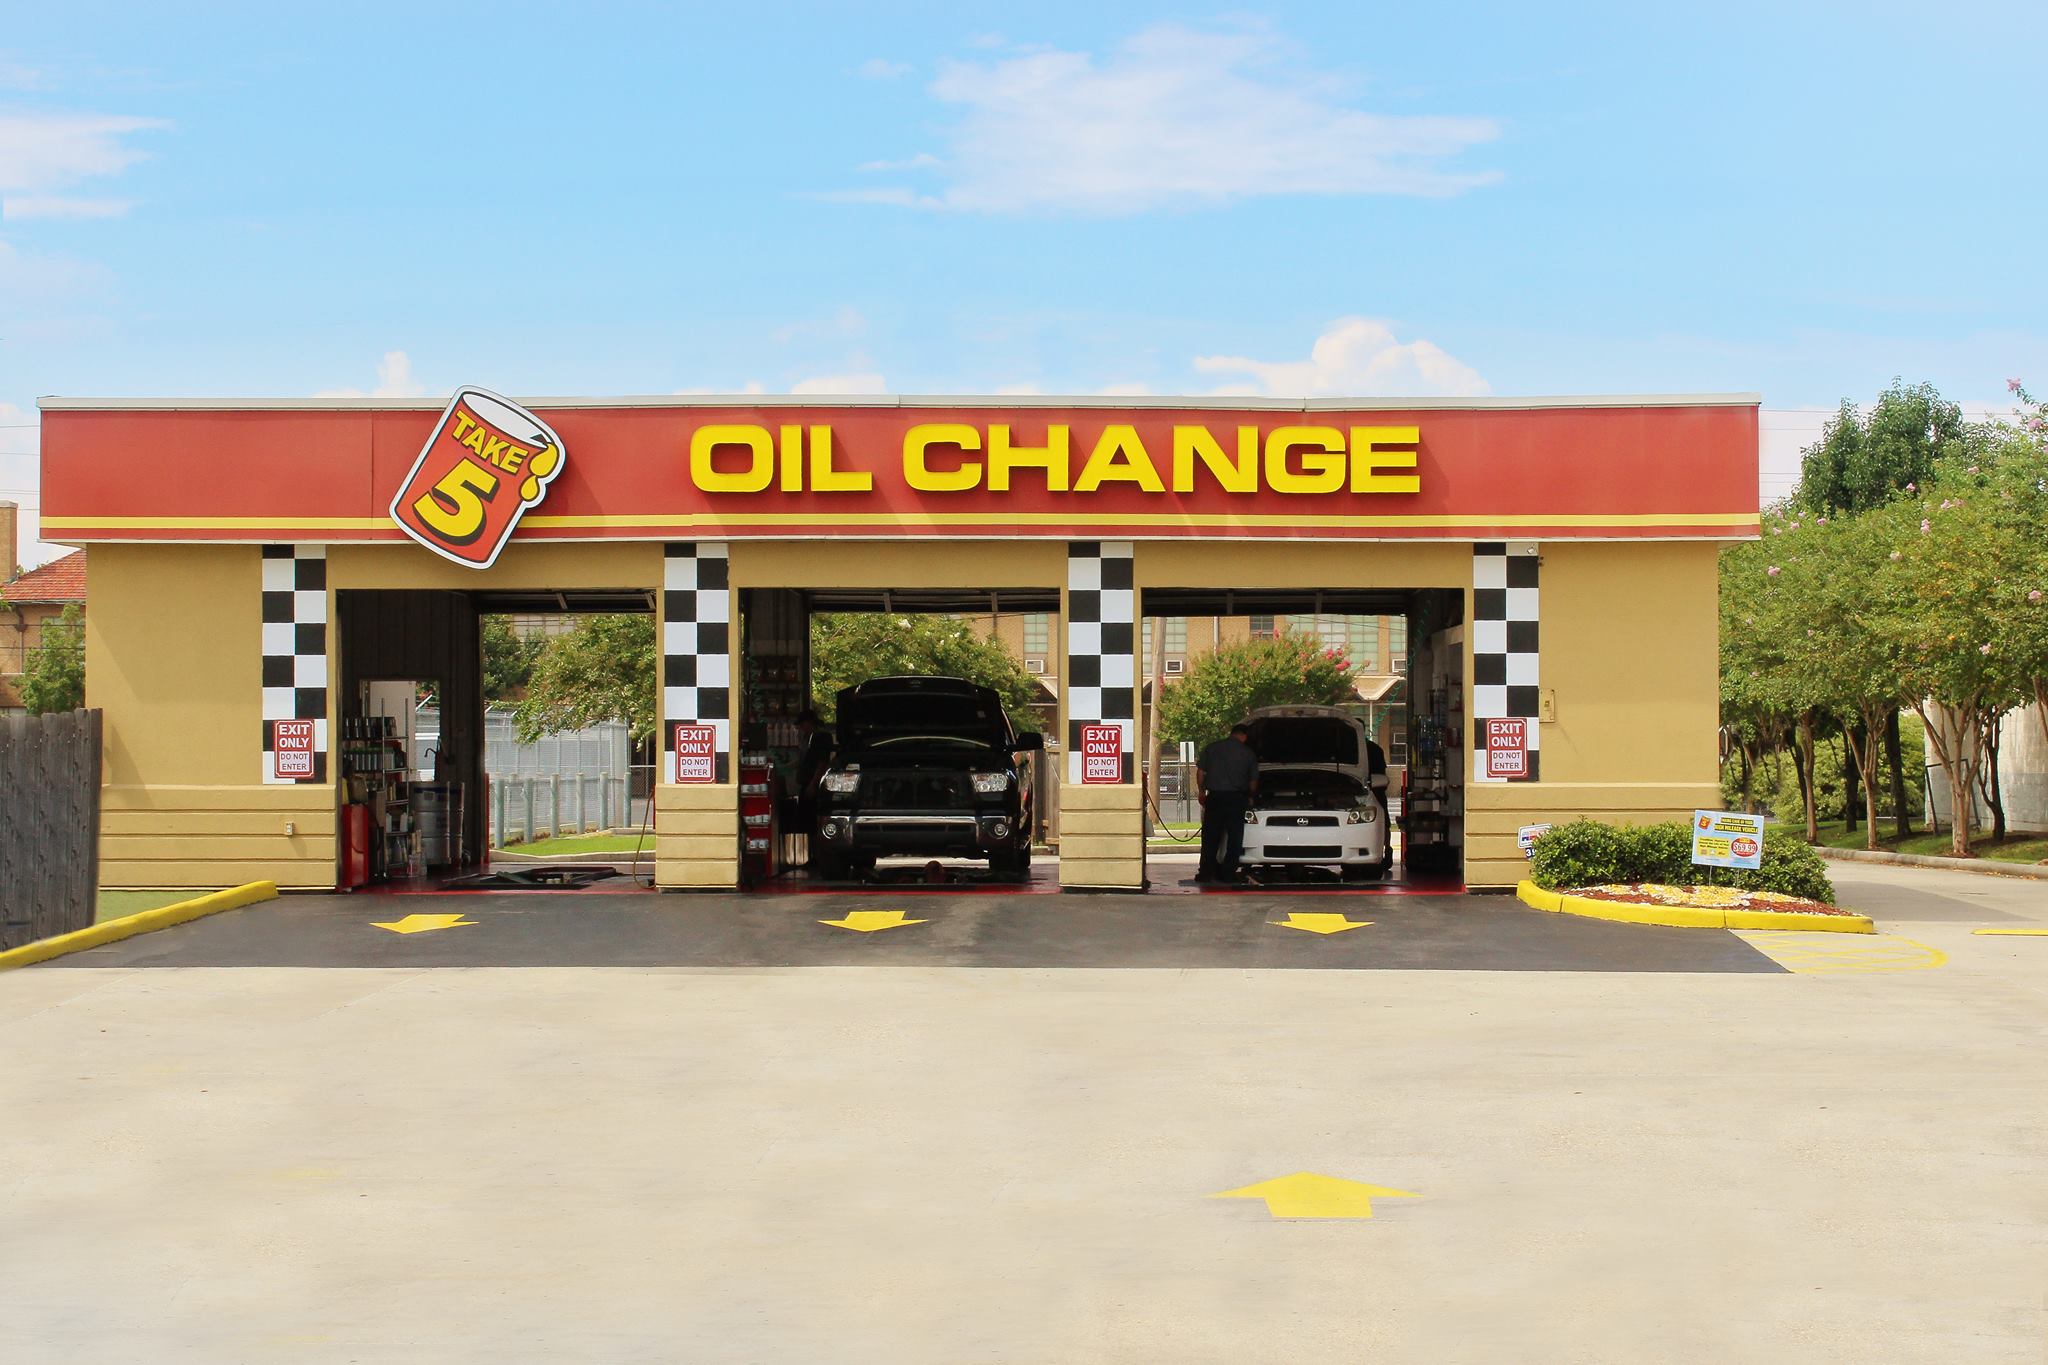 Take 5 Oil Change 3905 Airline Dr, Metairie, LA 70001